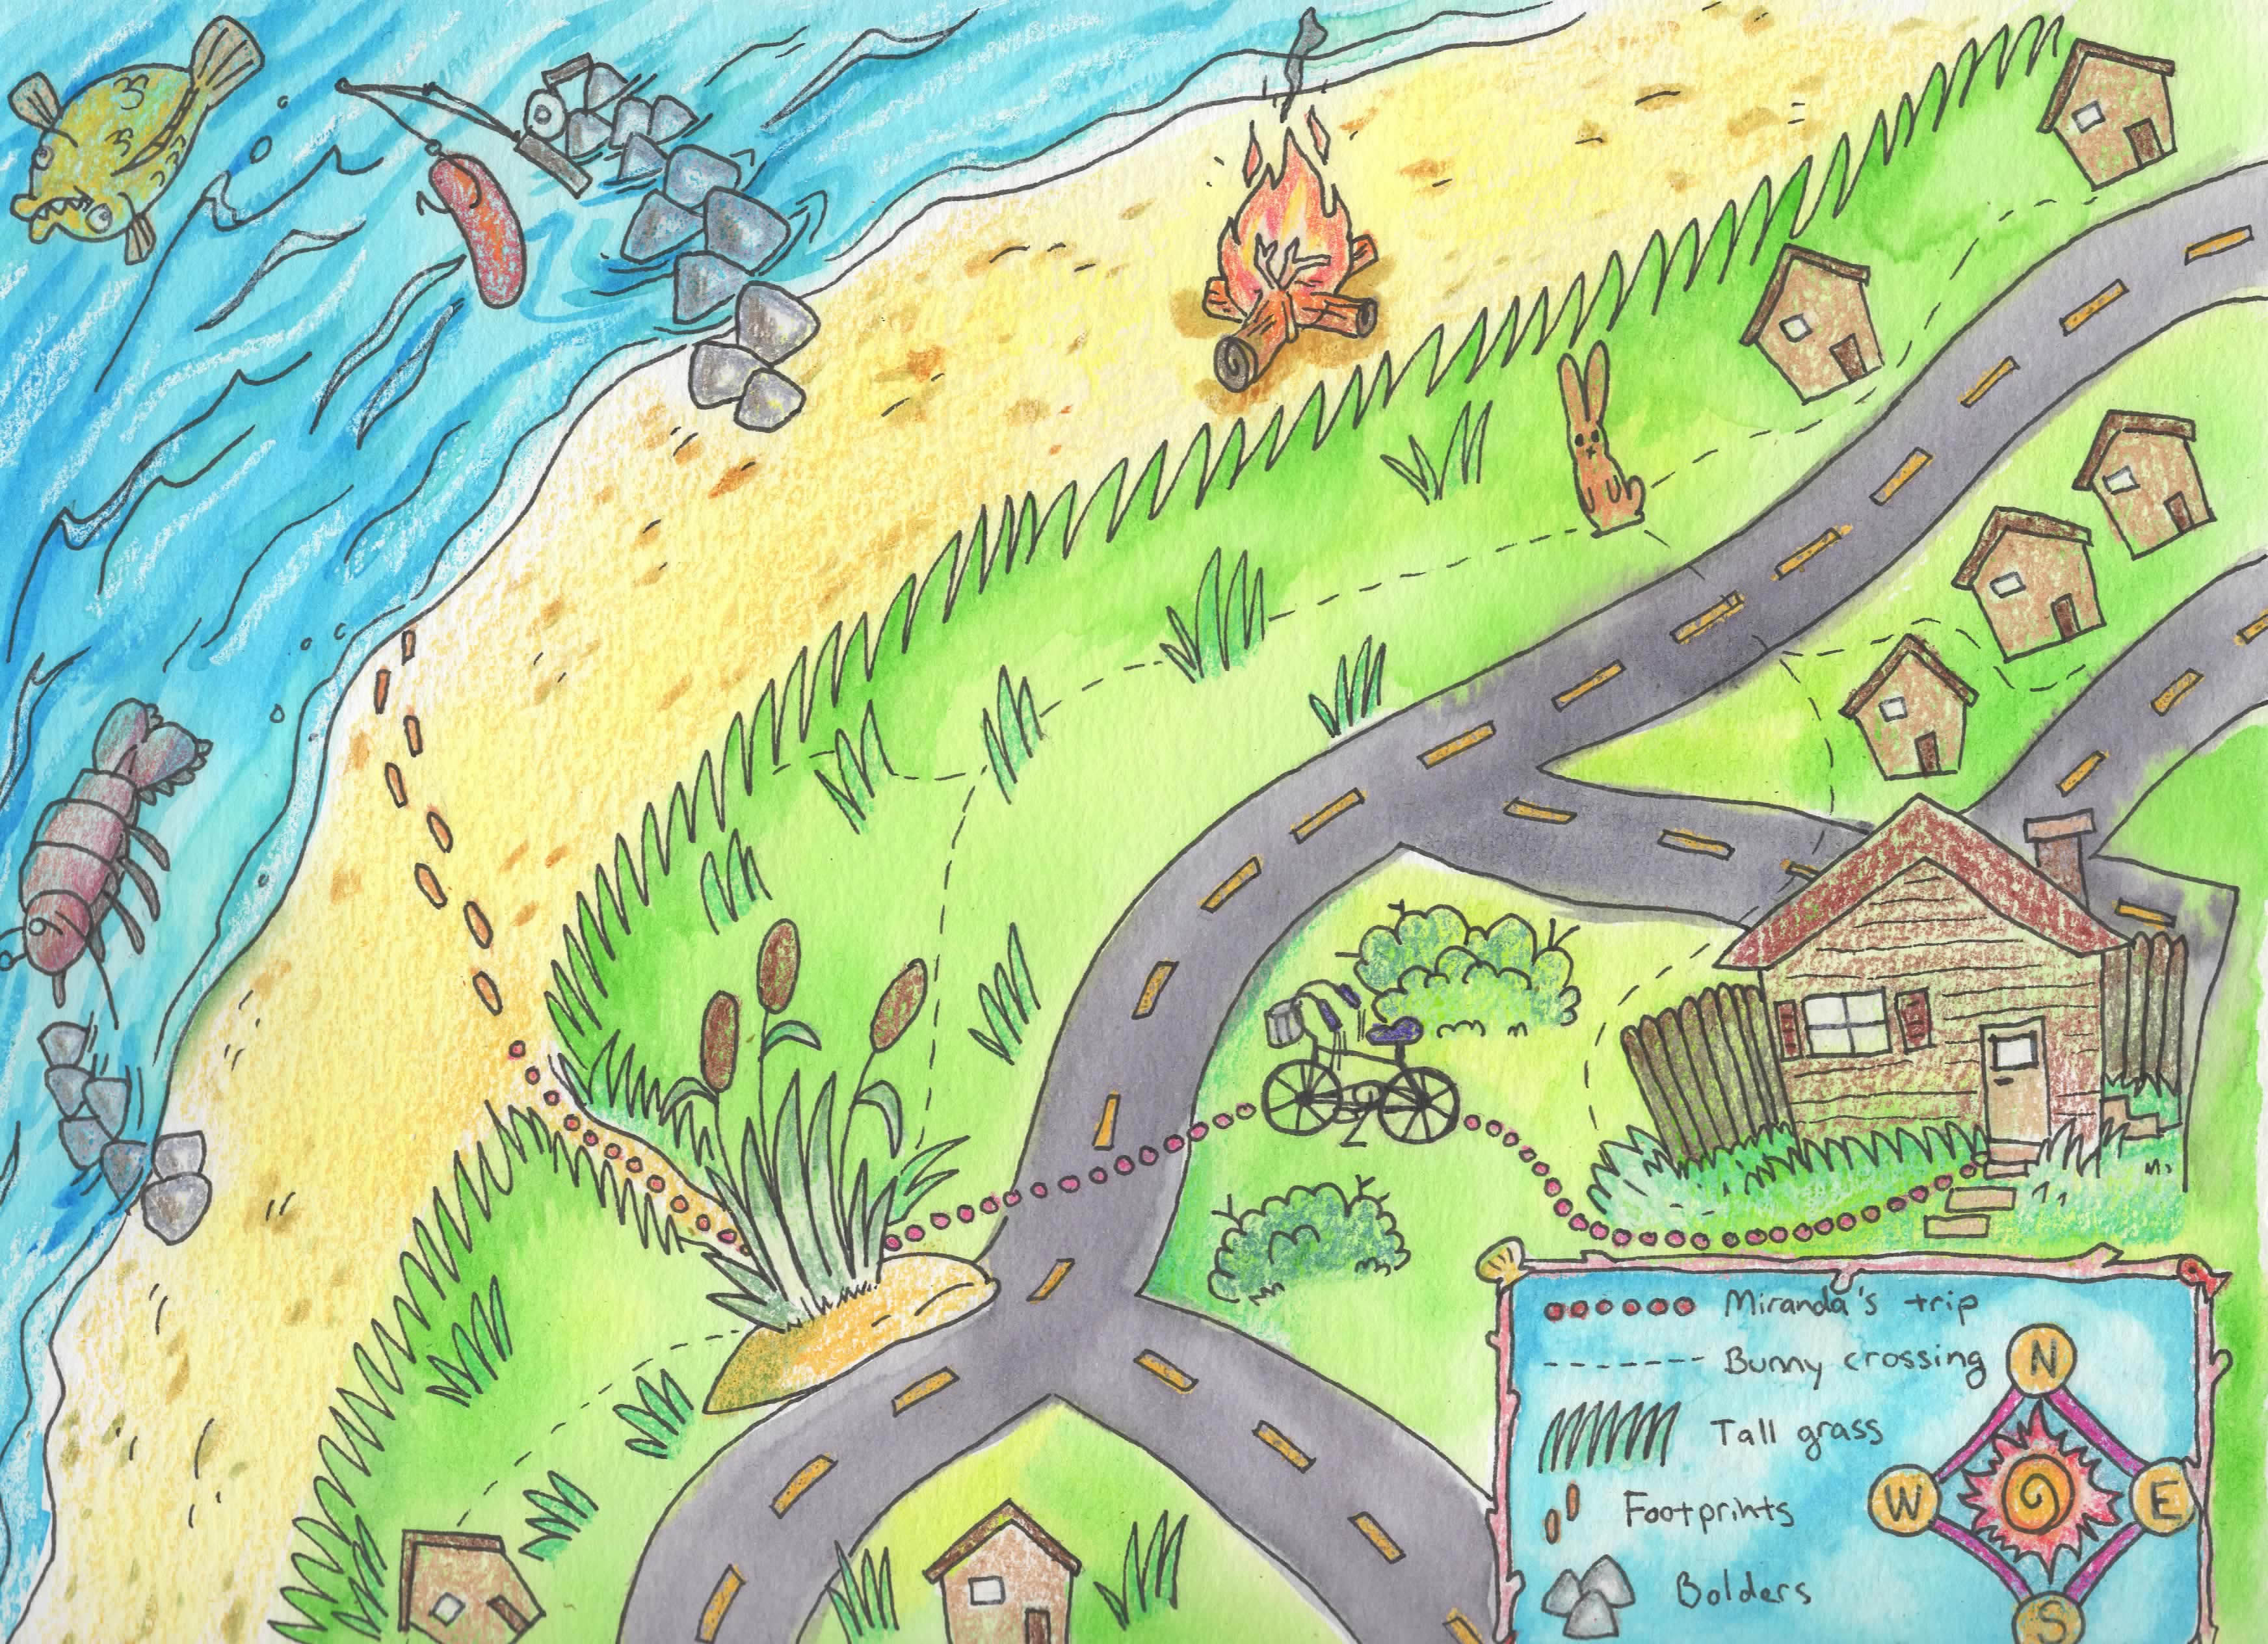 Students create a memory map illustration with legend, paths, and important locations.